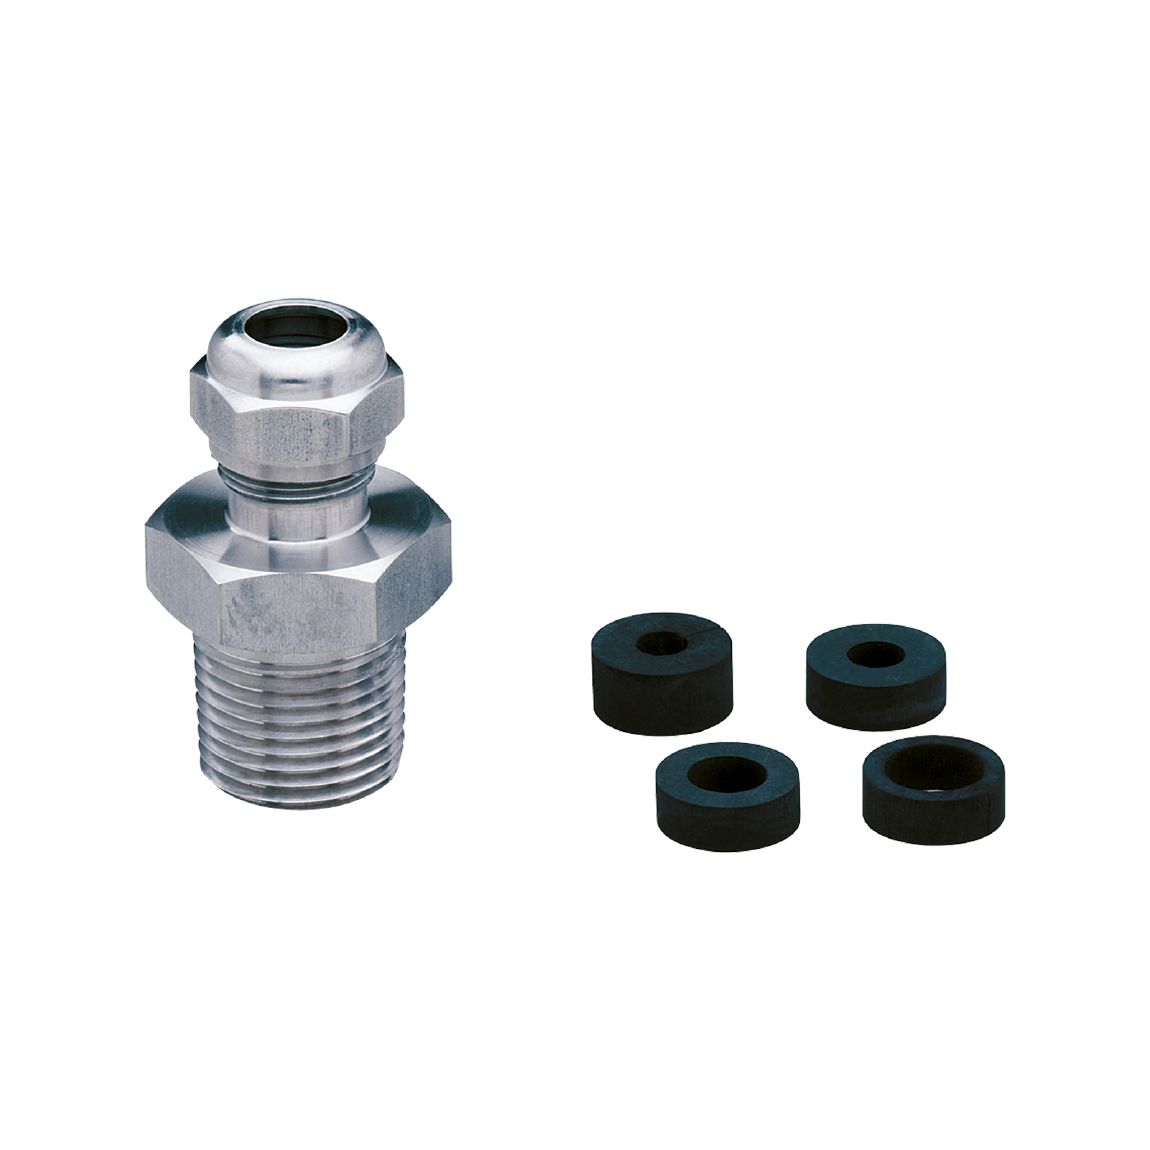 E30025 - Clamp fitting for process sensors - ifm